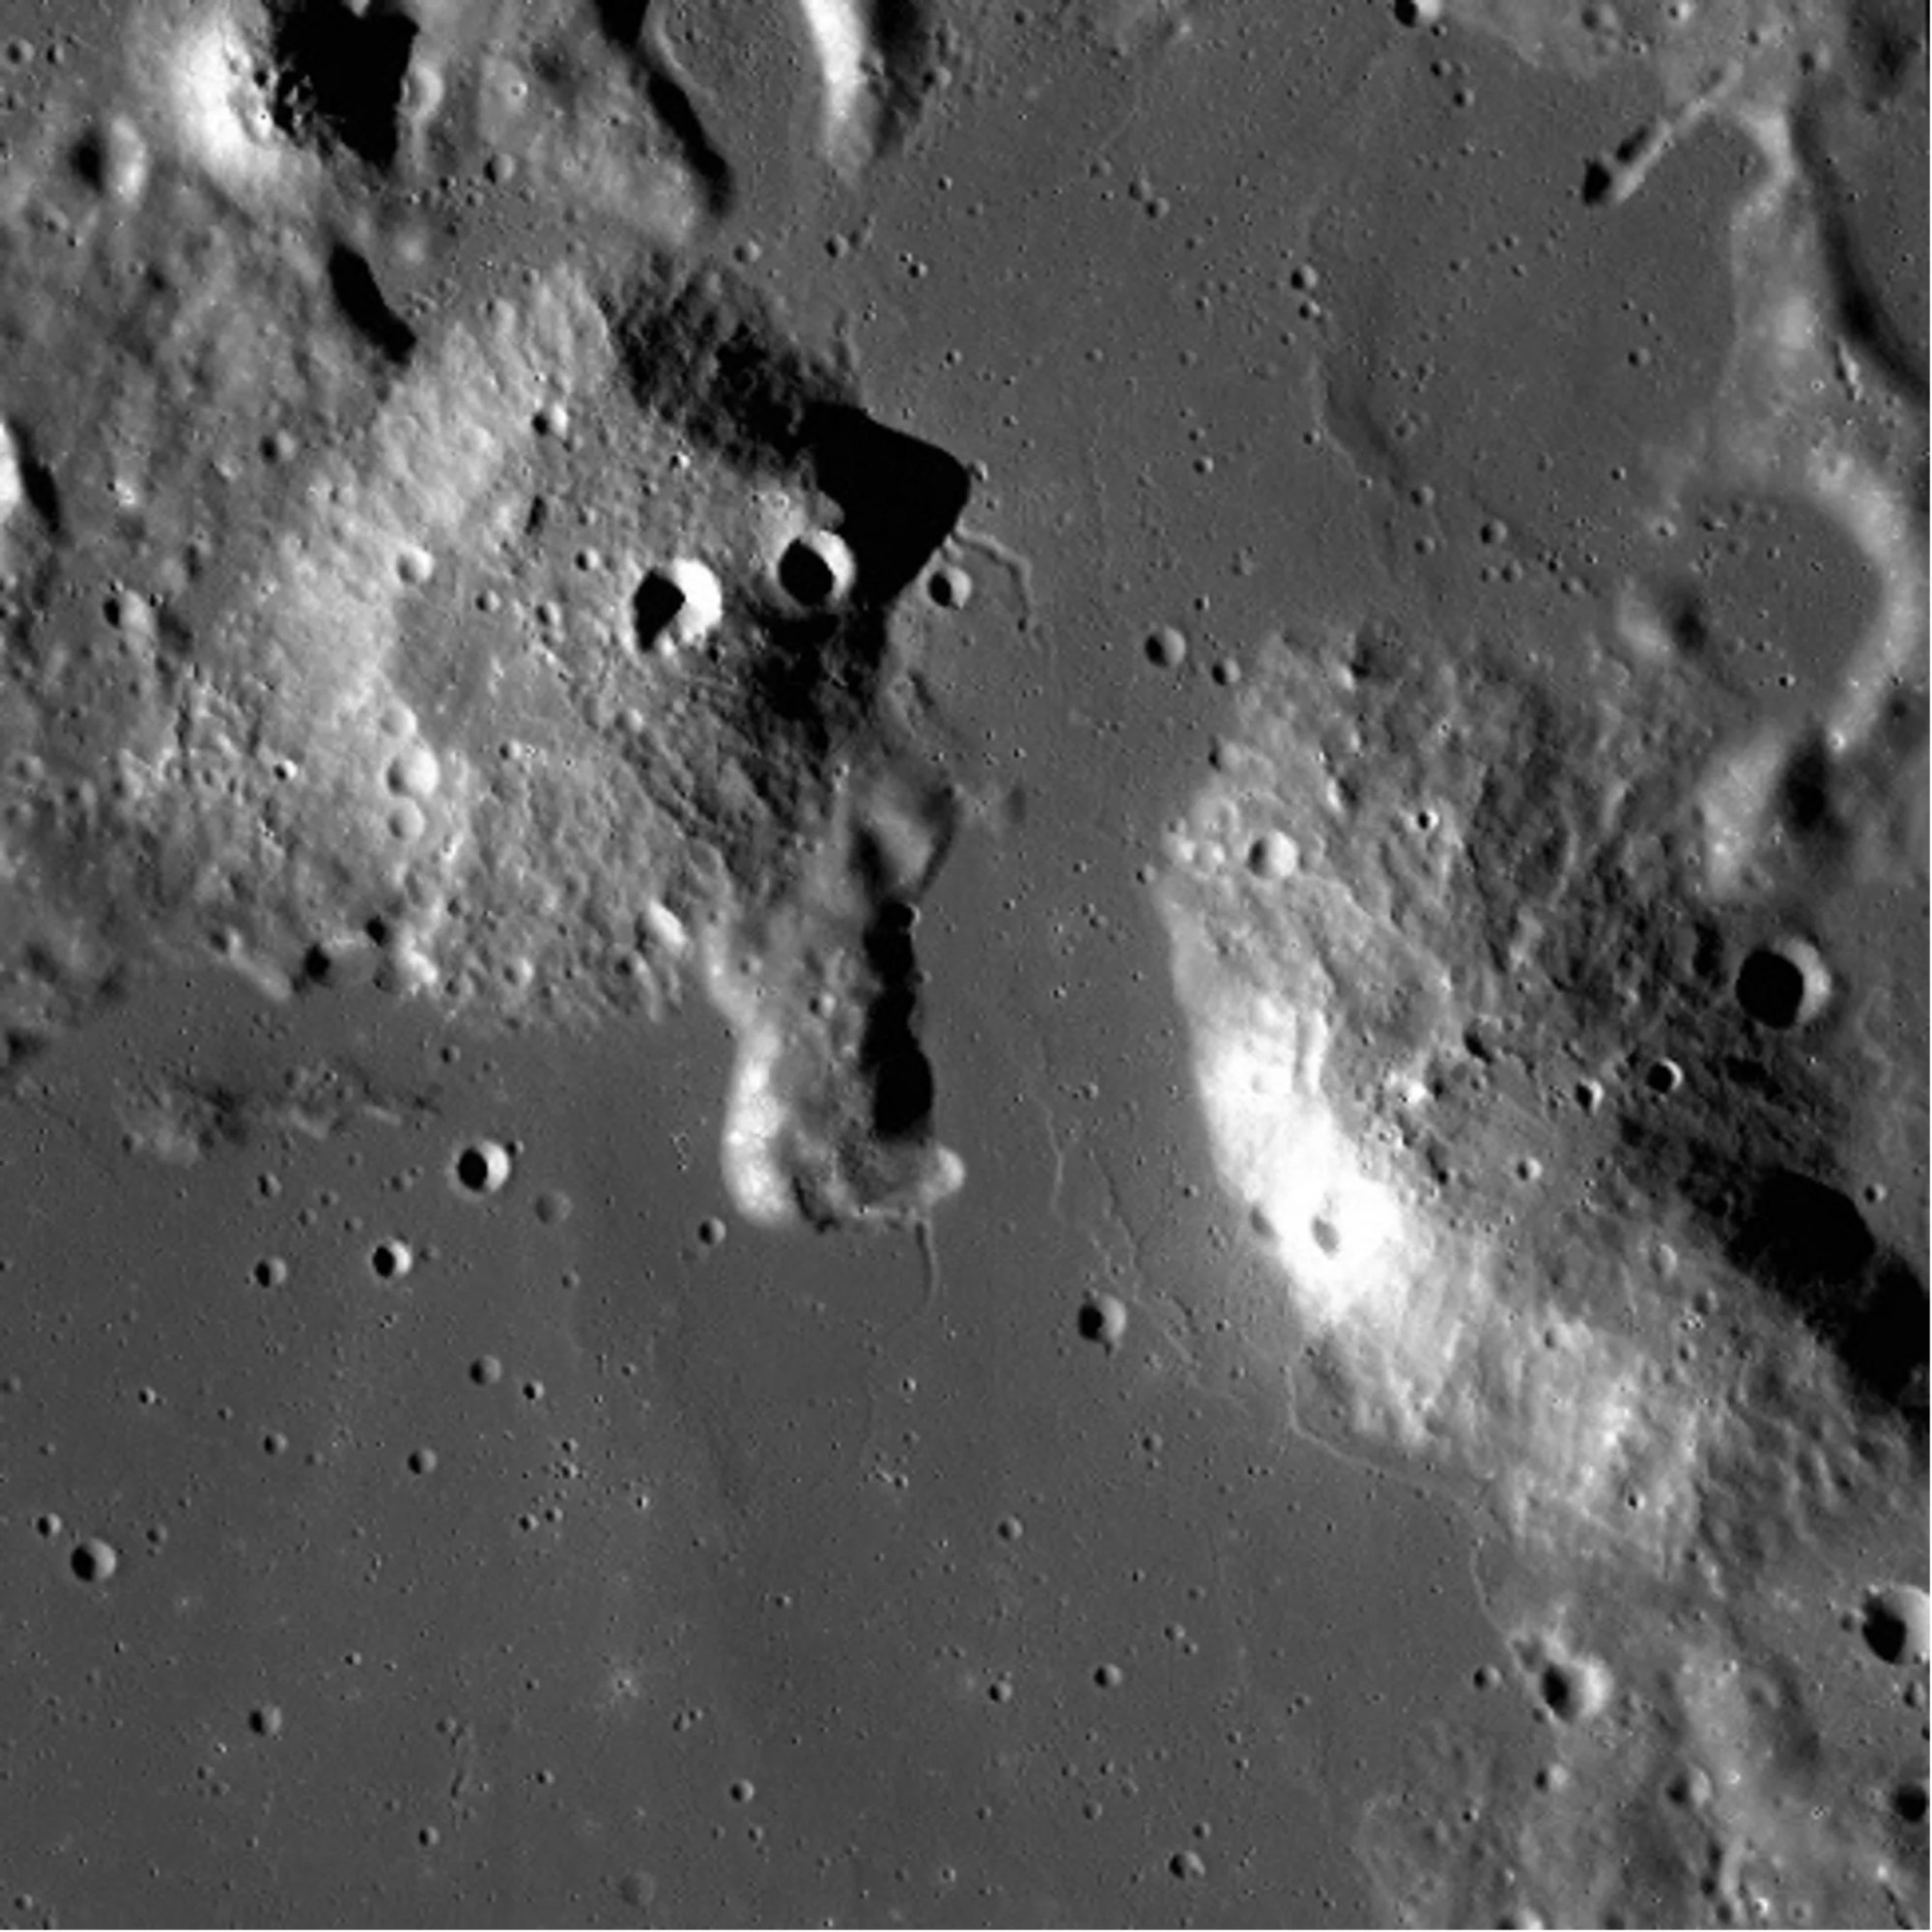 Pictured is an image of the lunar surface. The surface is relatively flat apart from two large mounds and some small, scattered craters. One sits in the bottom right corner and the other is towards the top left.  The top left mound has two prominent craters that are located on the middle-left side of the mound.